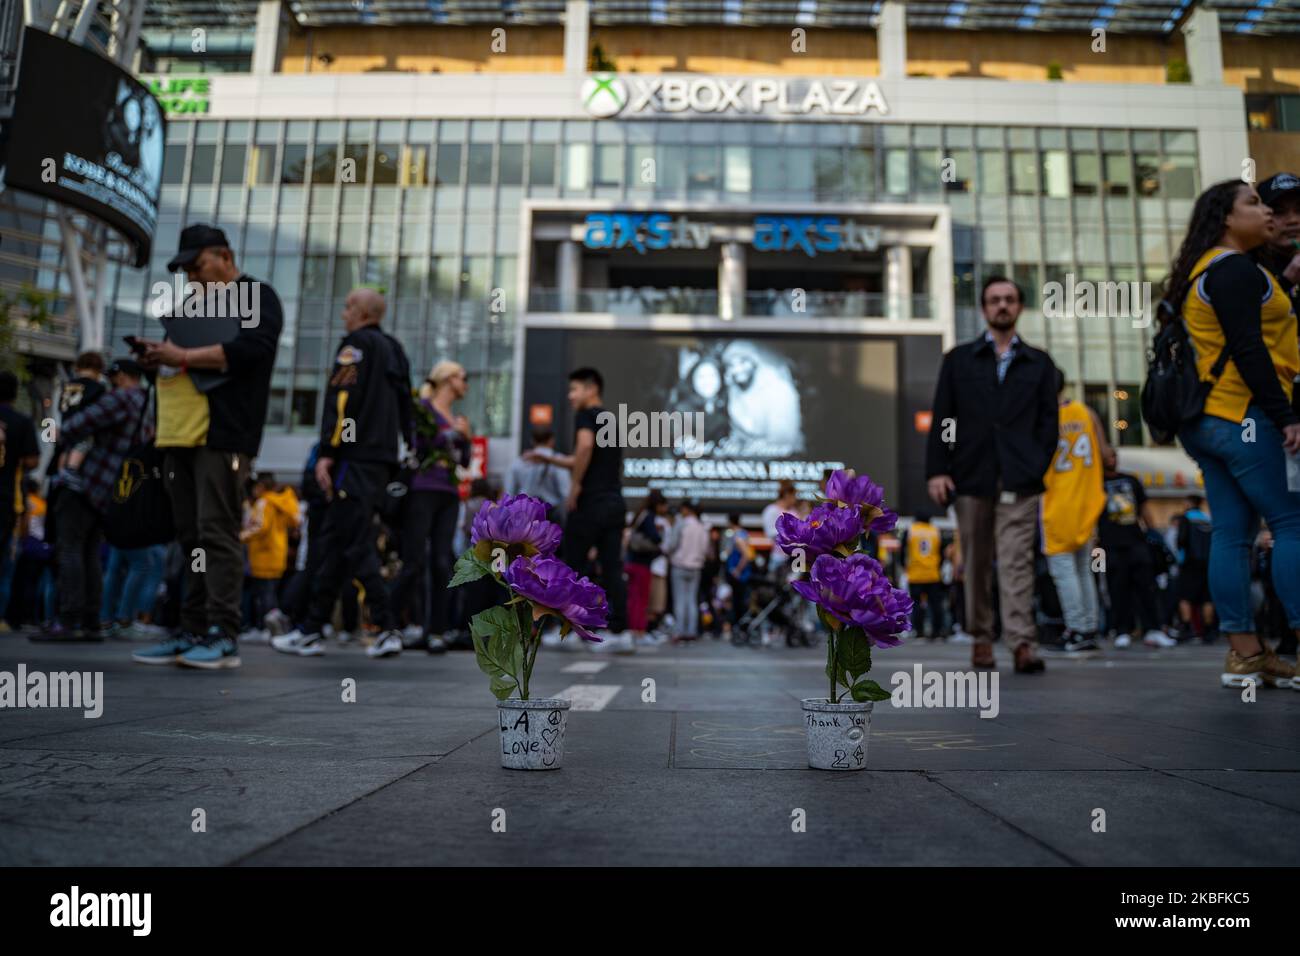 Flowers left in the center of Xbox Plaza for a memorial to Kobe Bryant, his daughter Gianna and all the others that passed away in a helicopter accident on January 27, 2020. (Photo by Brent Combs/NurPhoto) Stock Photo